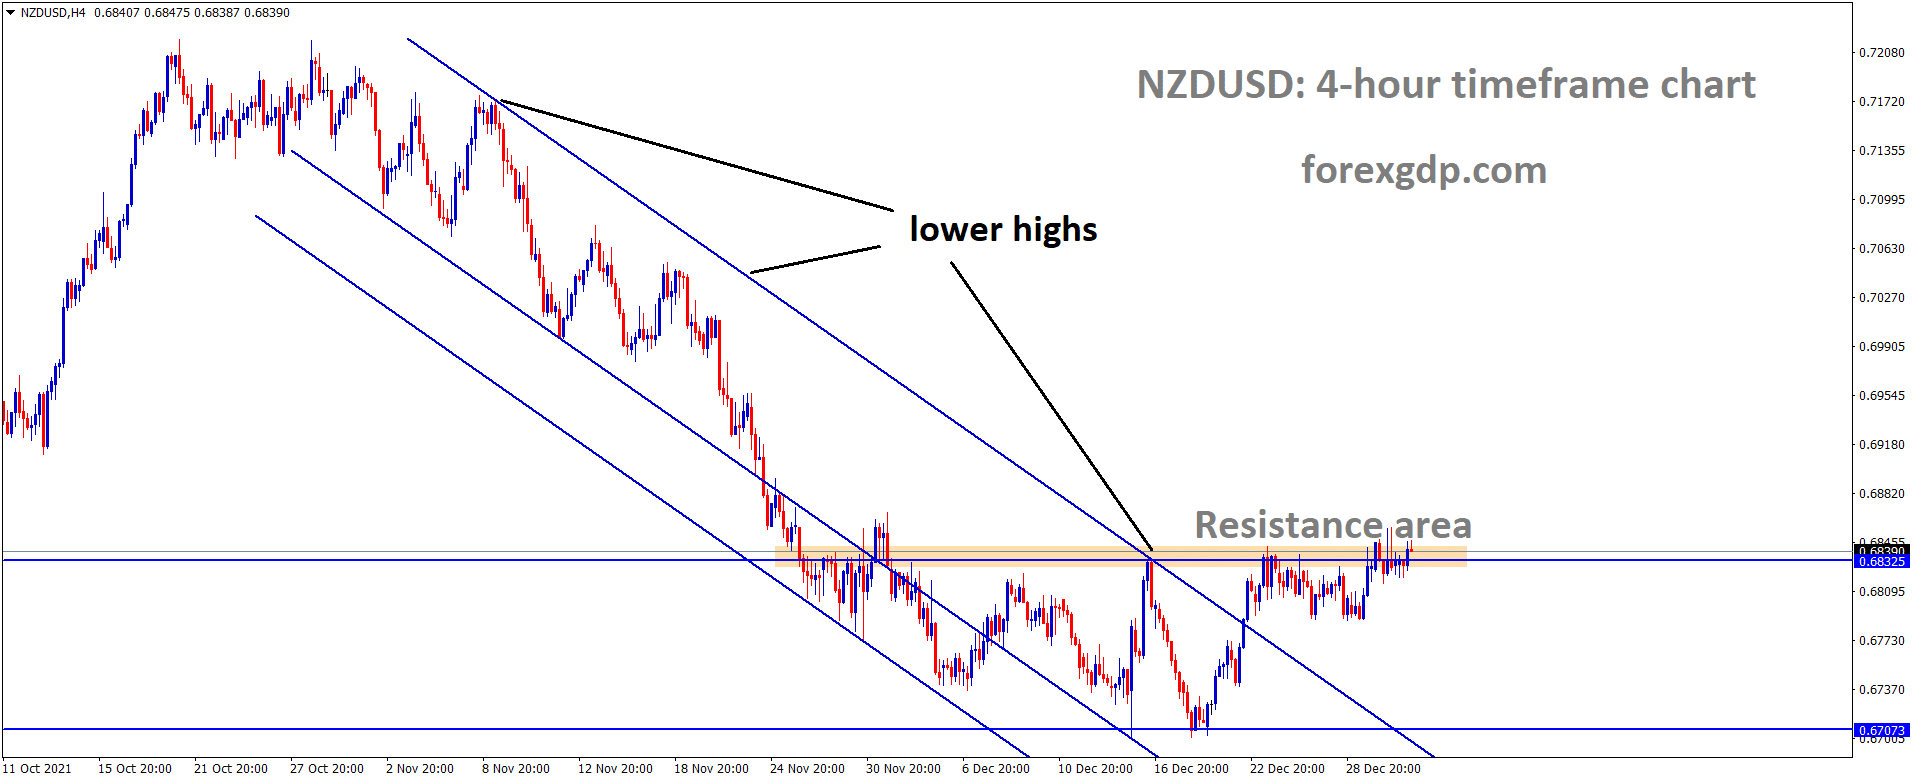 NZDUSD is moving the Box Pattern and the market has consolidated at the horizontal resistance area.